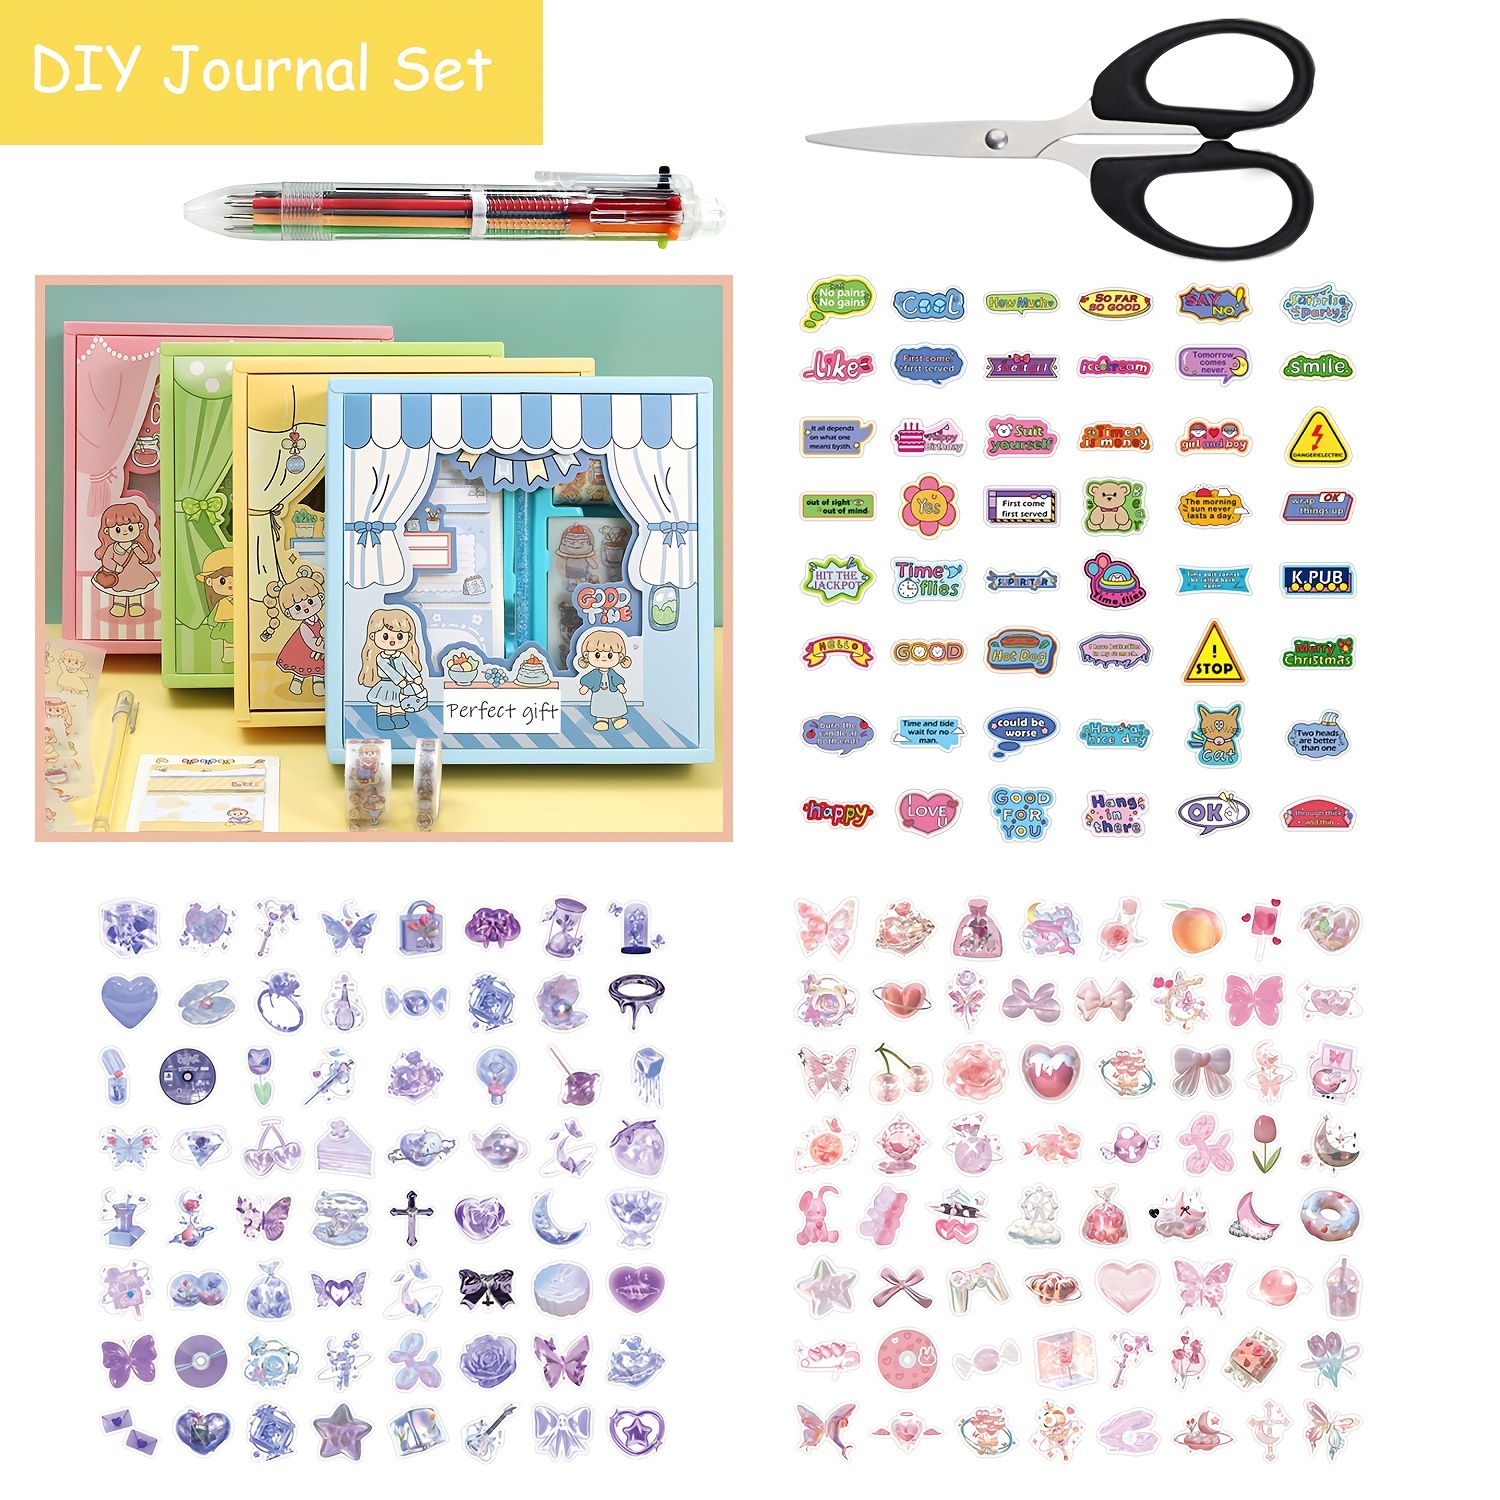 CUTE STONE DIY Journal Set for Girls, Great Birthday Gifts for Ages 6-14  Year Old Girls, Art & Crafts Stuff for Teen Kids, Scrapbook & Diary  Supplies